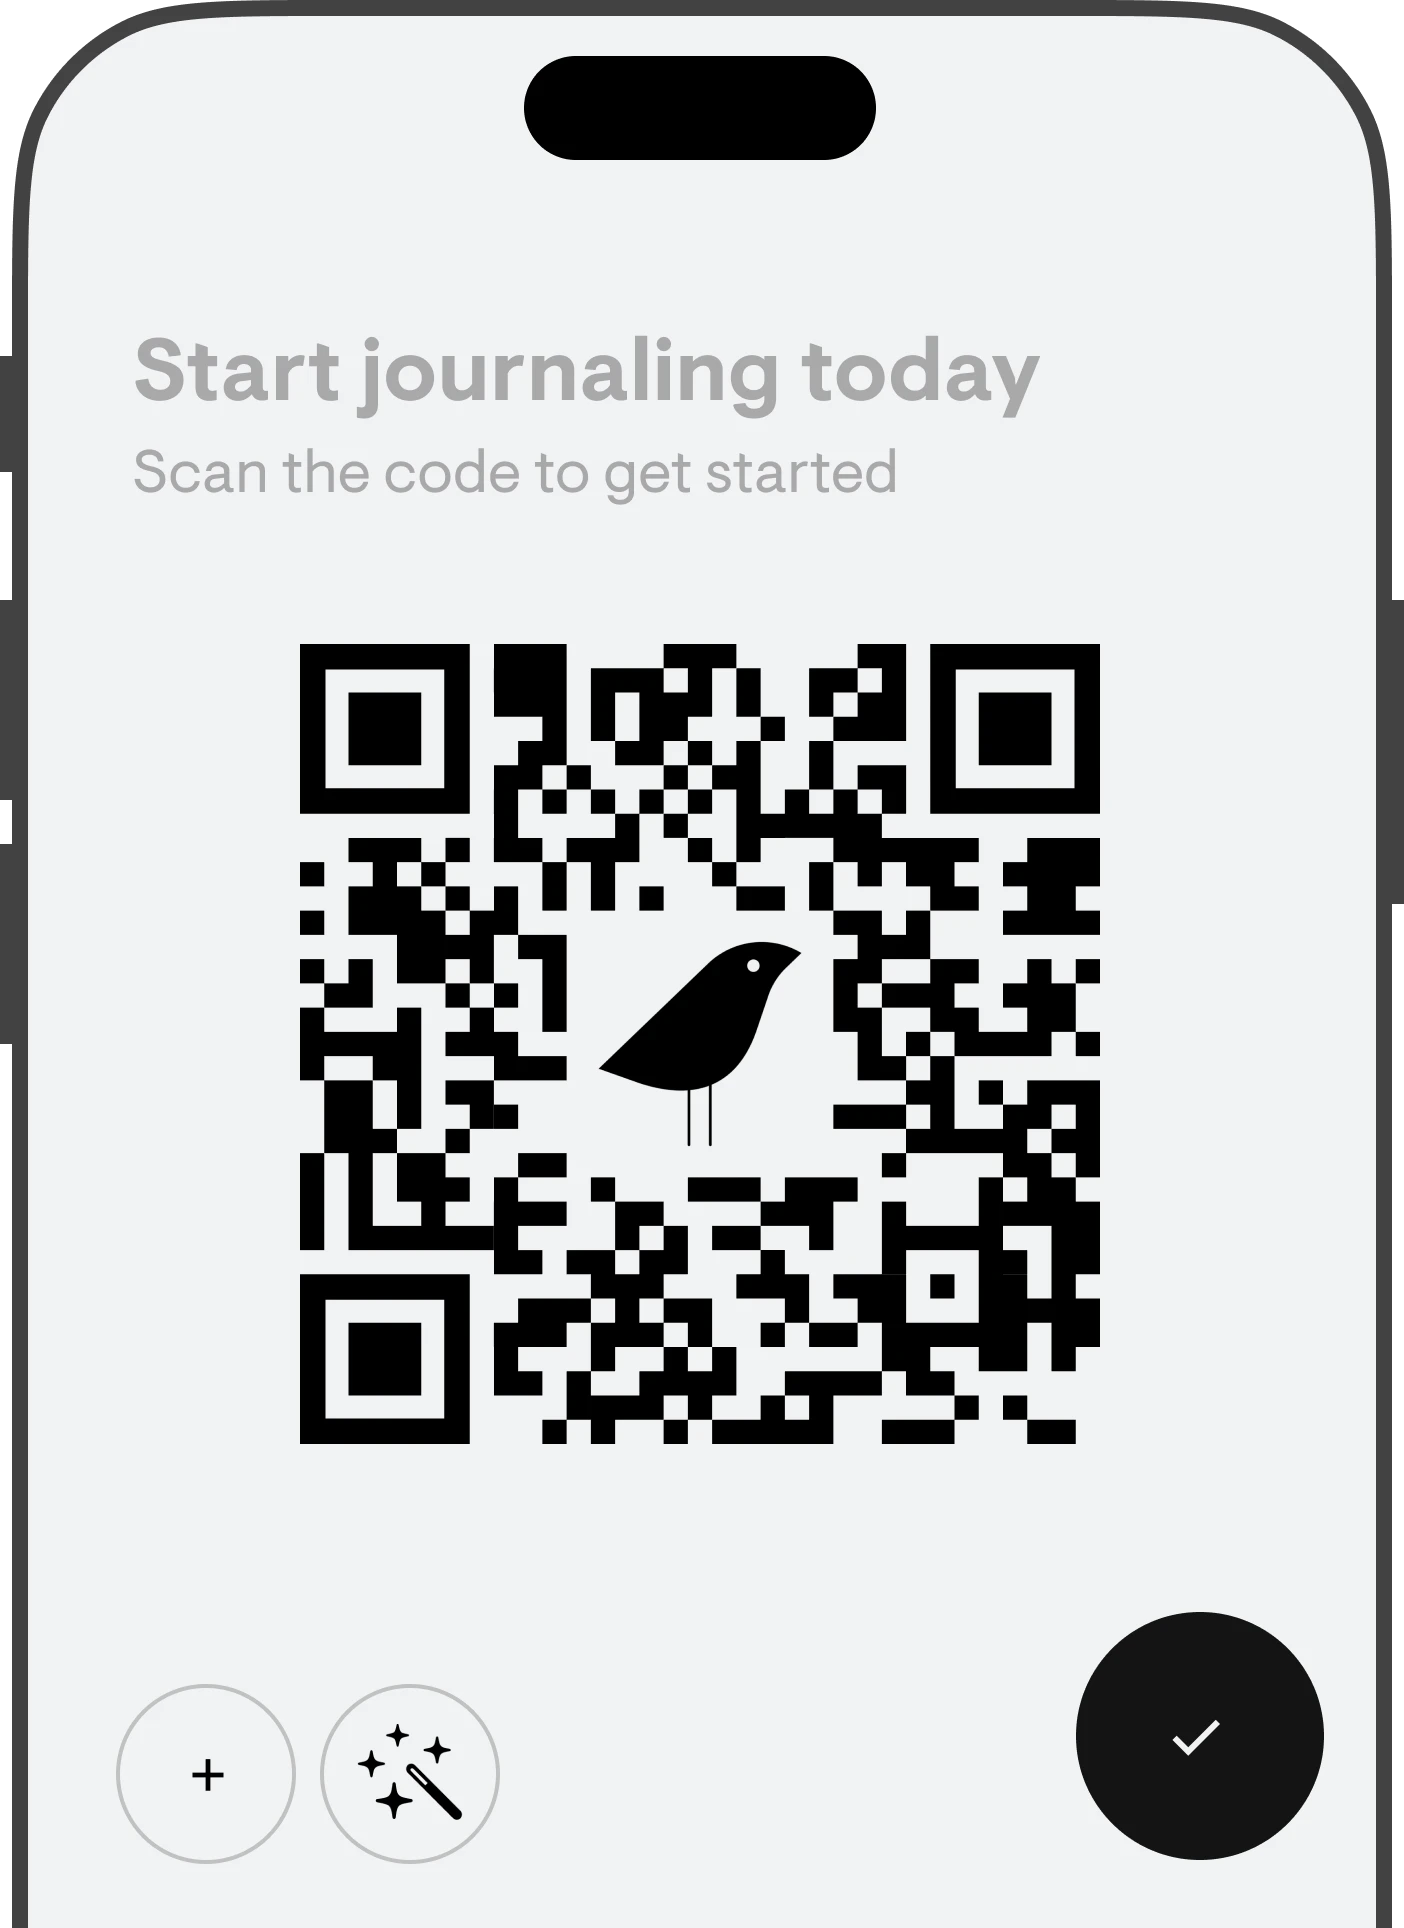 A QR code that one can scan using their phone to download the stoic mental health journal app for iOS, macOS, iPadOS, and visionOS.